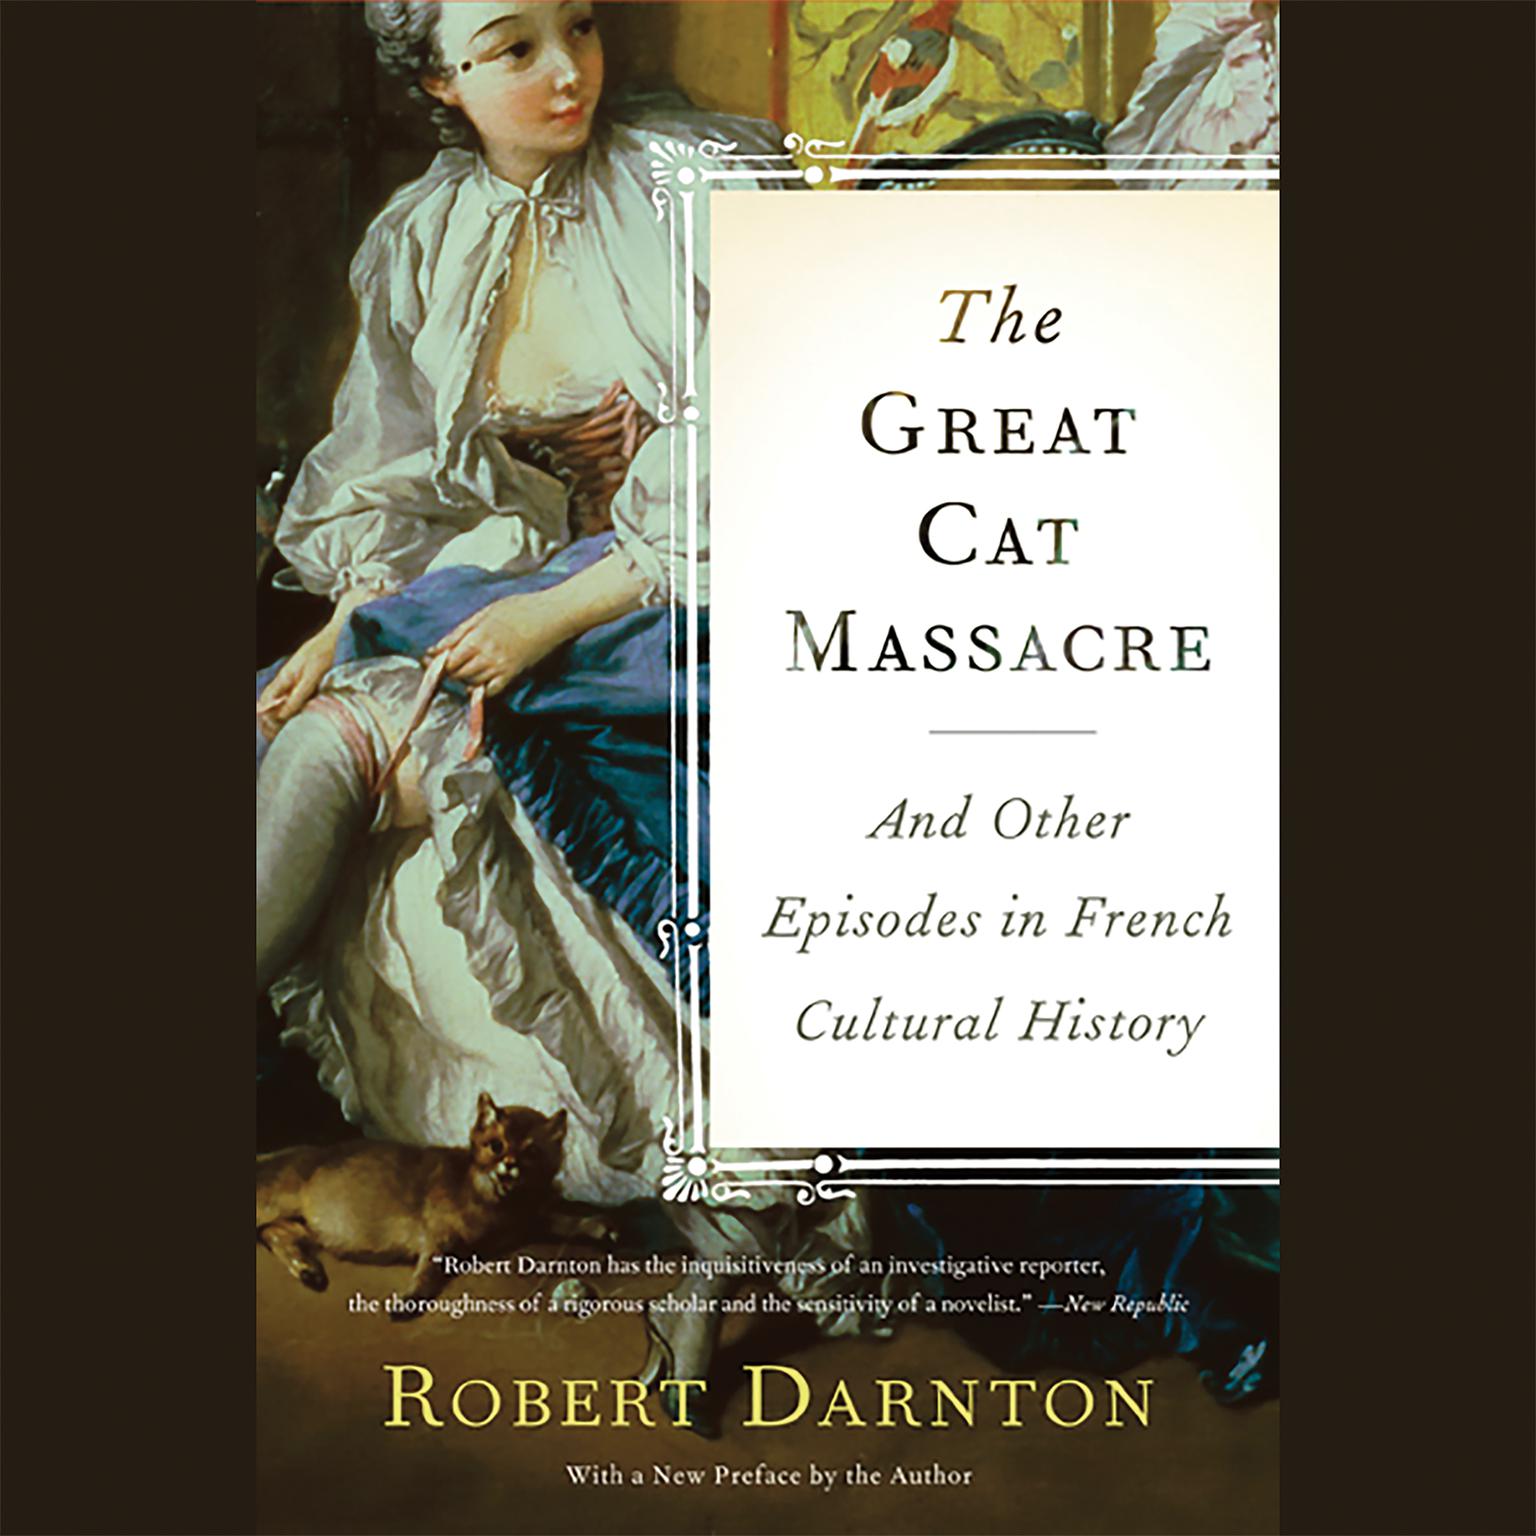 The Great Cat Massacre: And Other Episodes in French Cultural History Audiobook, by Robert Darnton